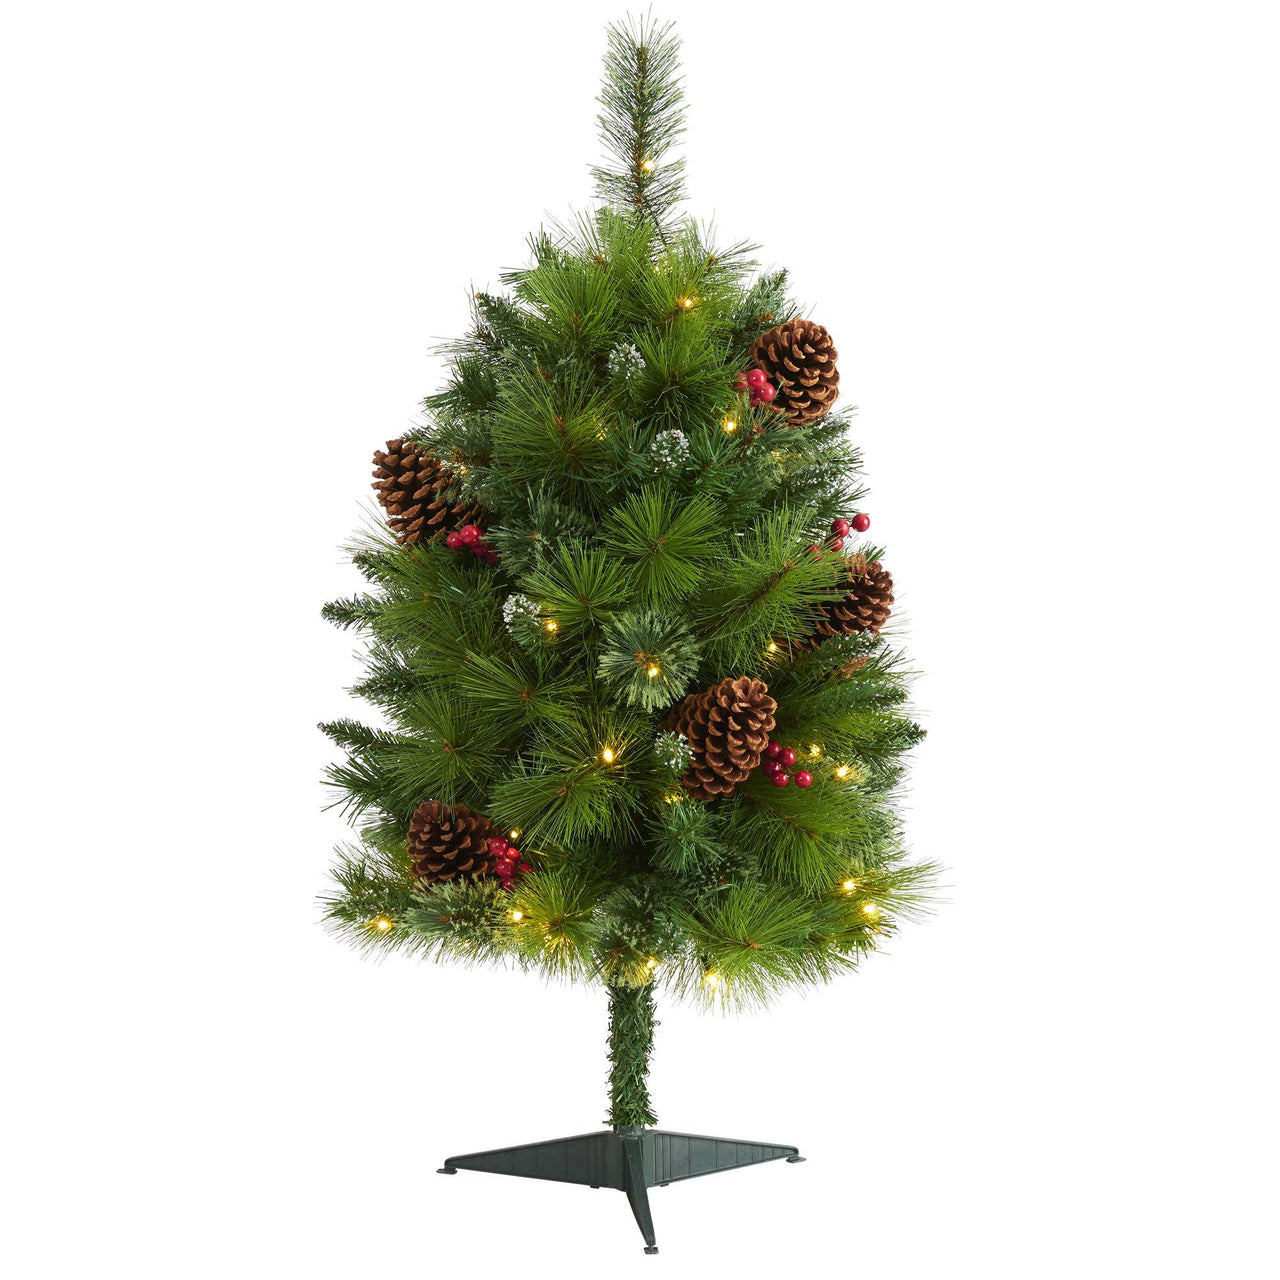 3’ Montana Mixed Pine Artificial Christmas Tree with Pine Cones, Berries and 50 Clear LED Lights